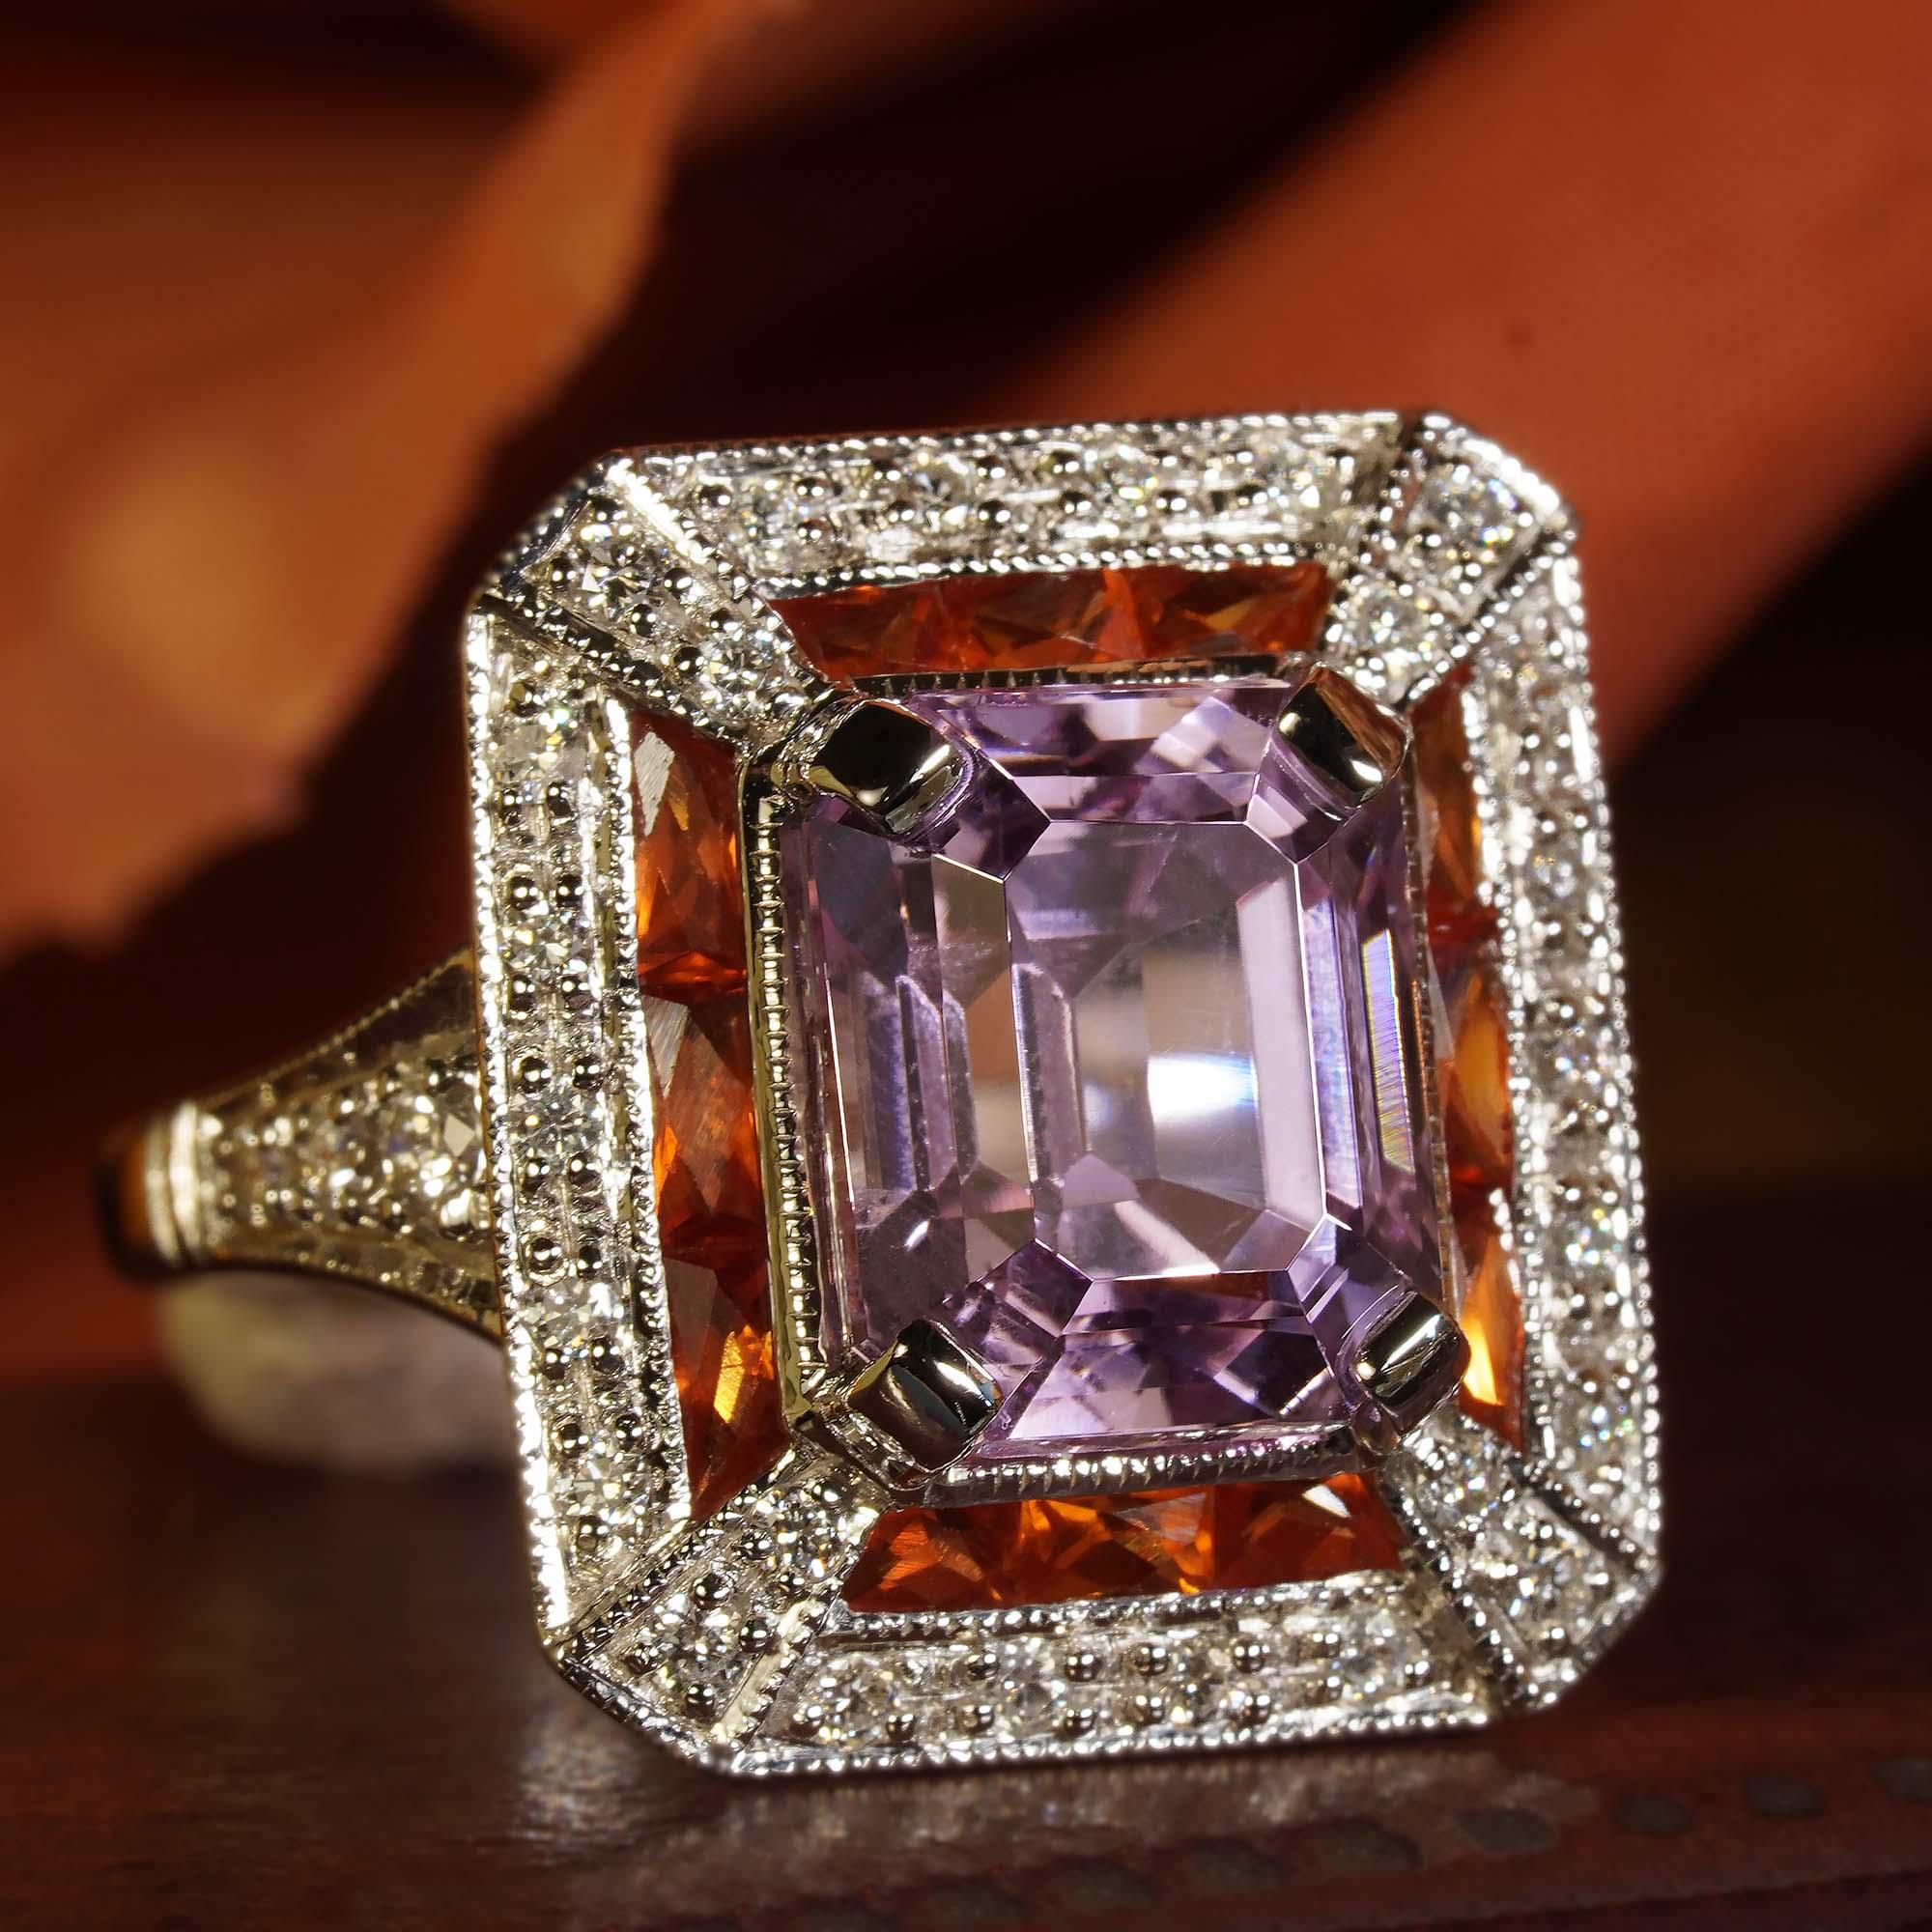 Make a powerful statement in pink. This Art Deco inspired 14k white gold ring features a perfect sparkly emerald cut pink kunzite set into an octagon shape setting. The center stone is framed in French cut orange sapphires, finished with outer